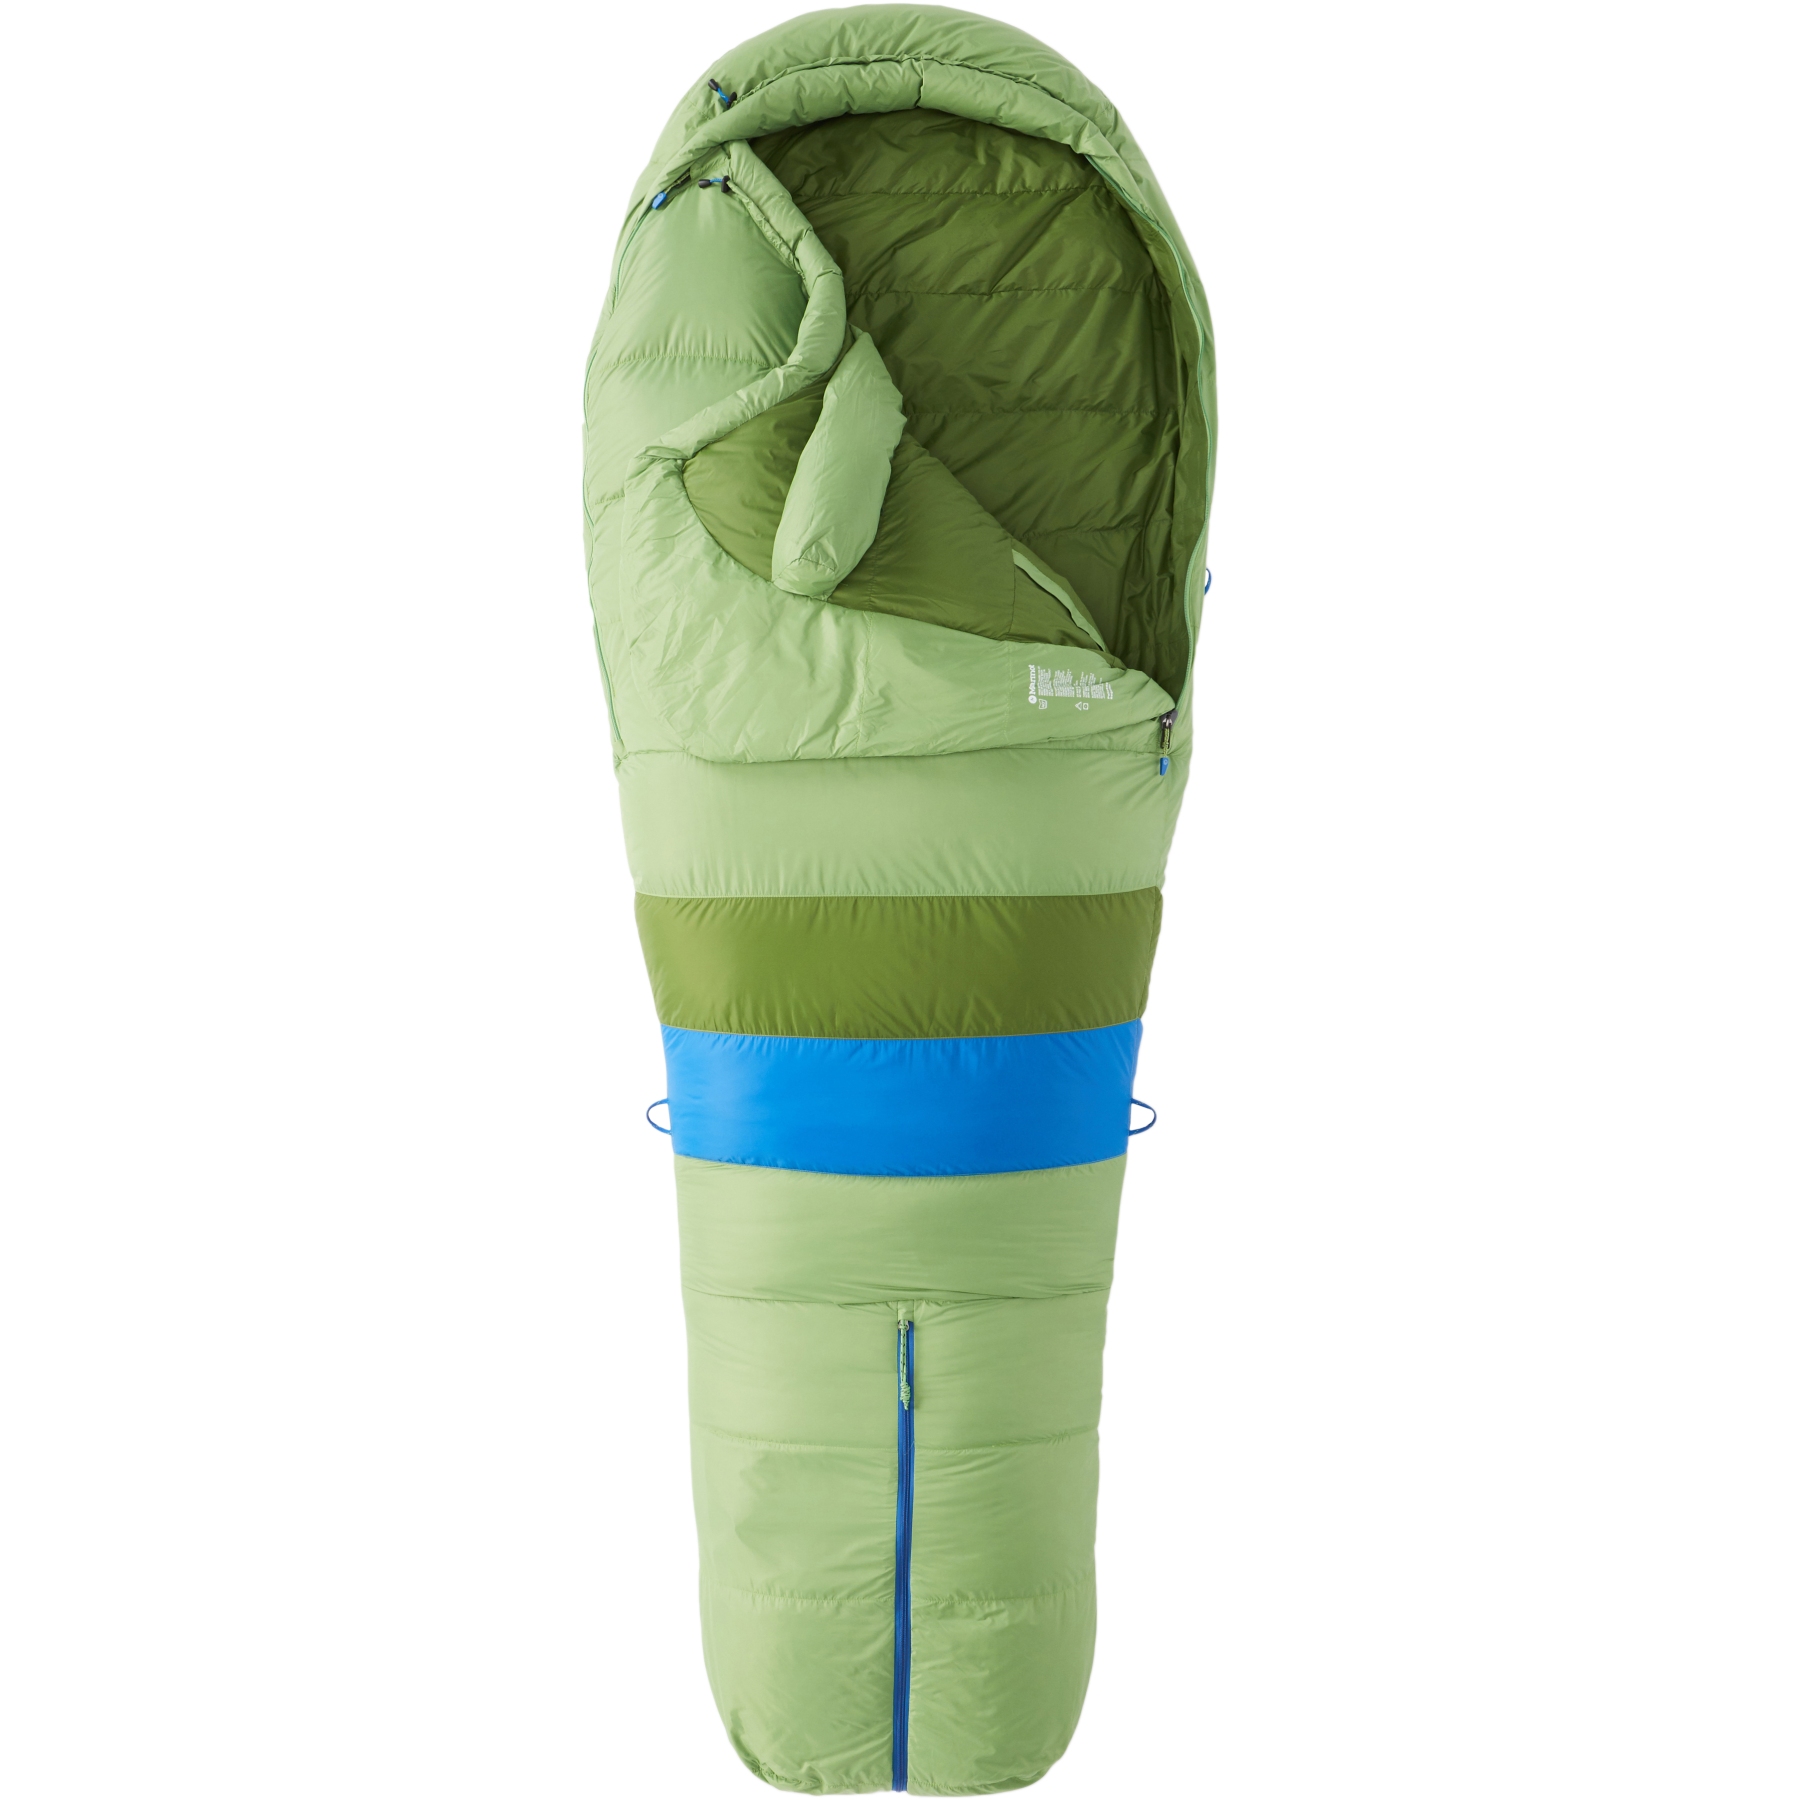 Picture of Marmot Palisade Long Sleeping Bag - forest green/foliage